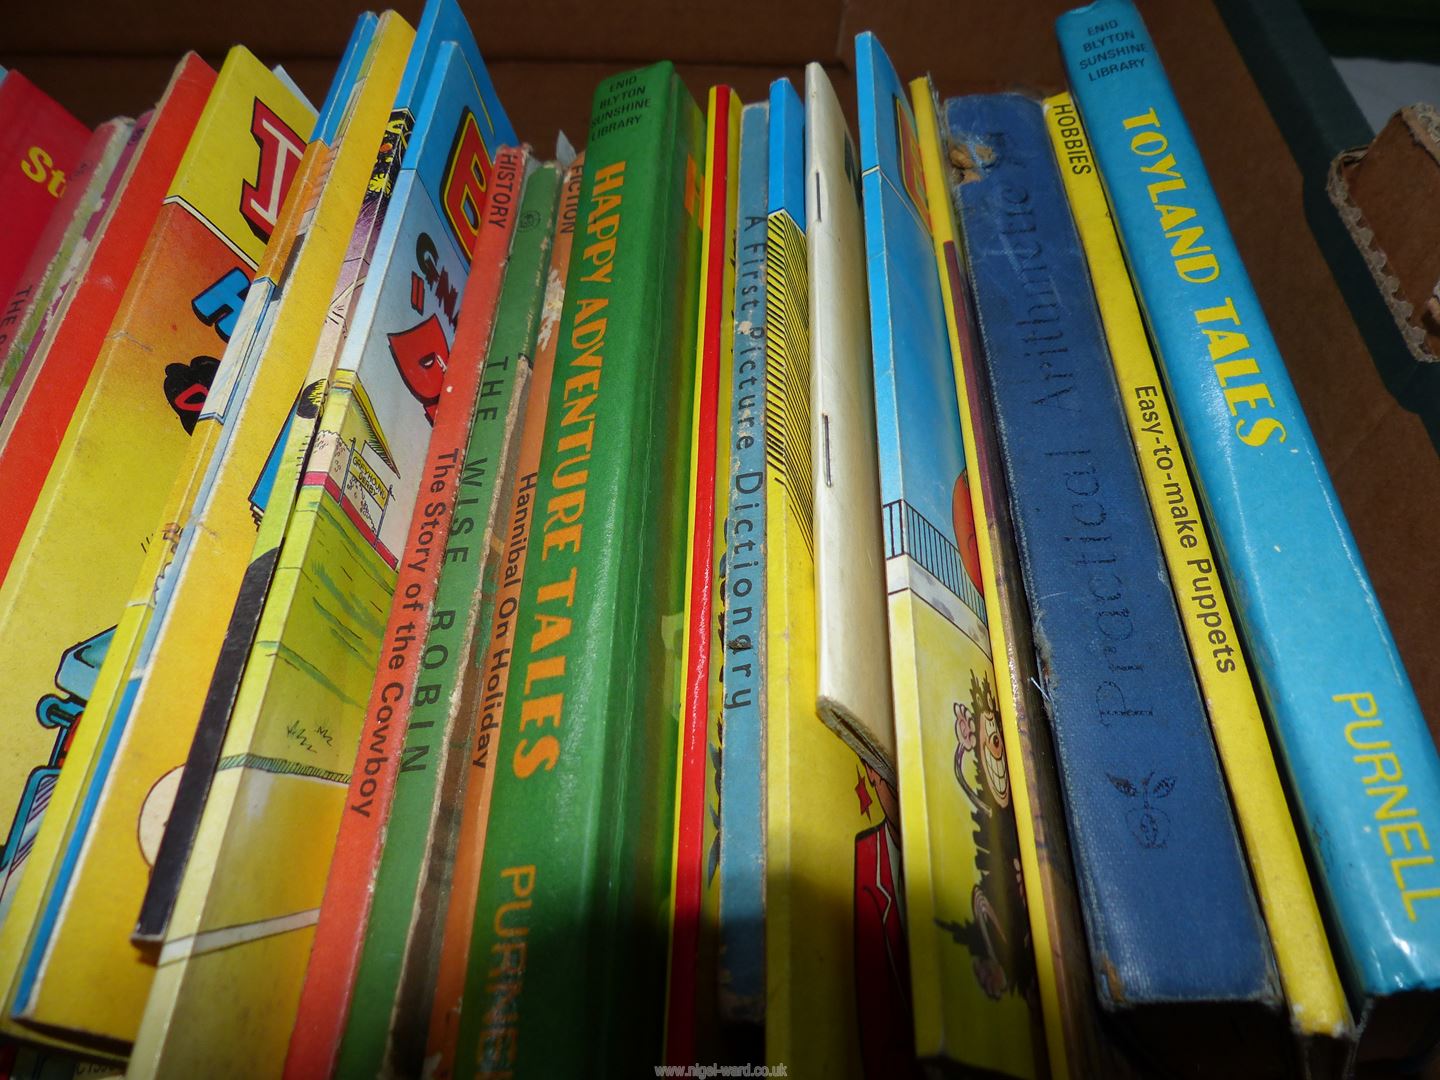 A quantity of children's books to include; Toyland Tales, Dandy, Ladybird Books, Rupert, etc. - Image 2 of 3